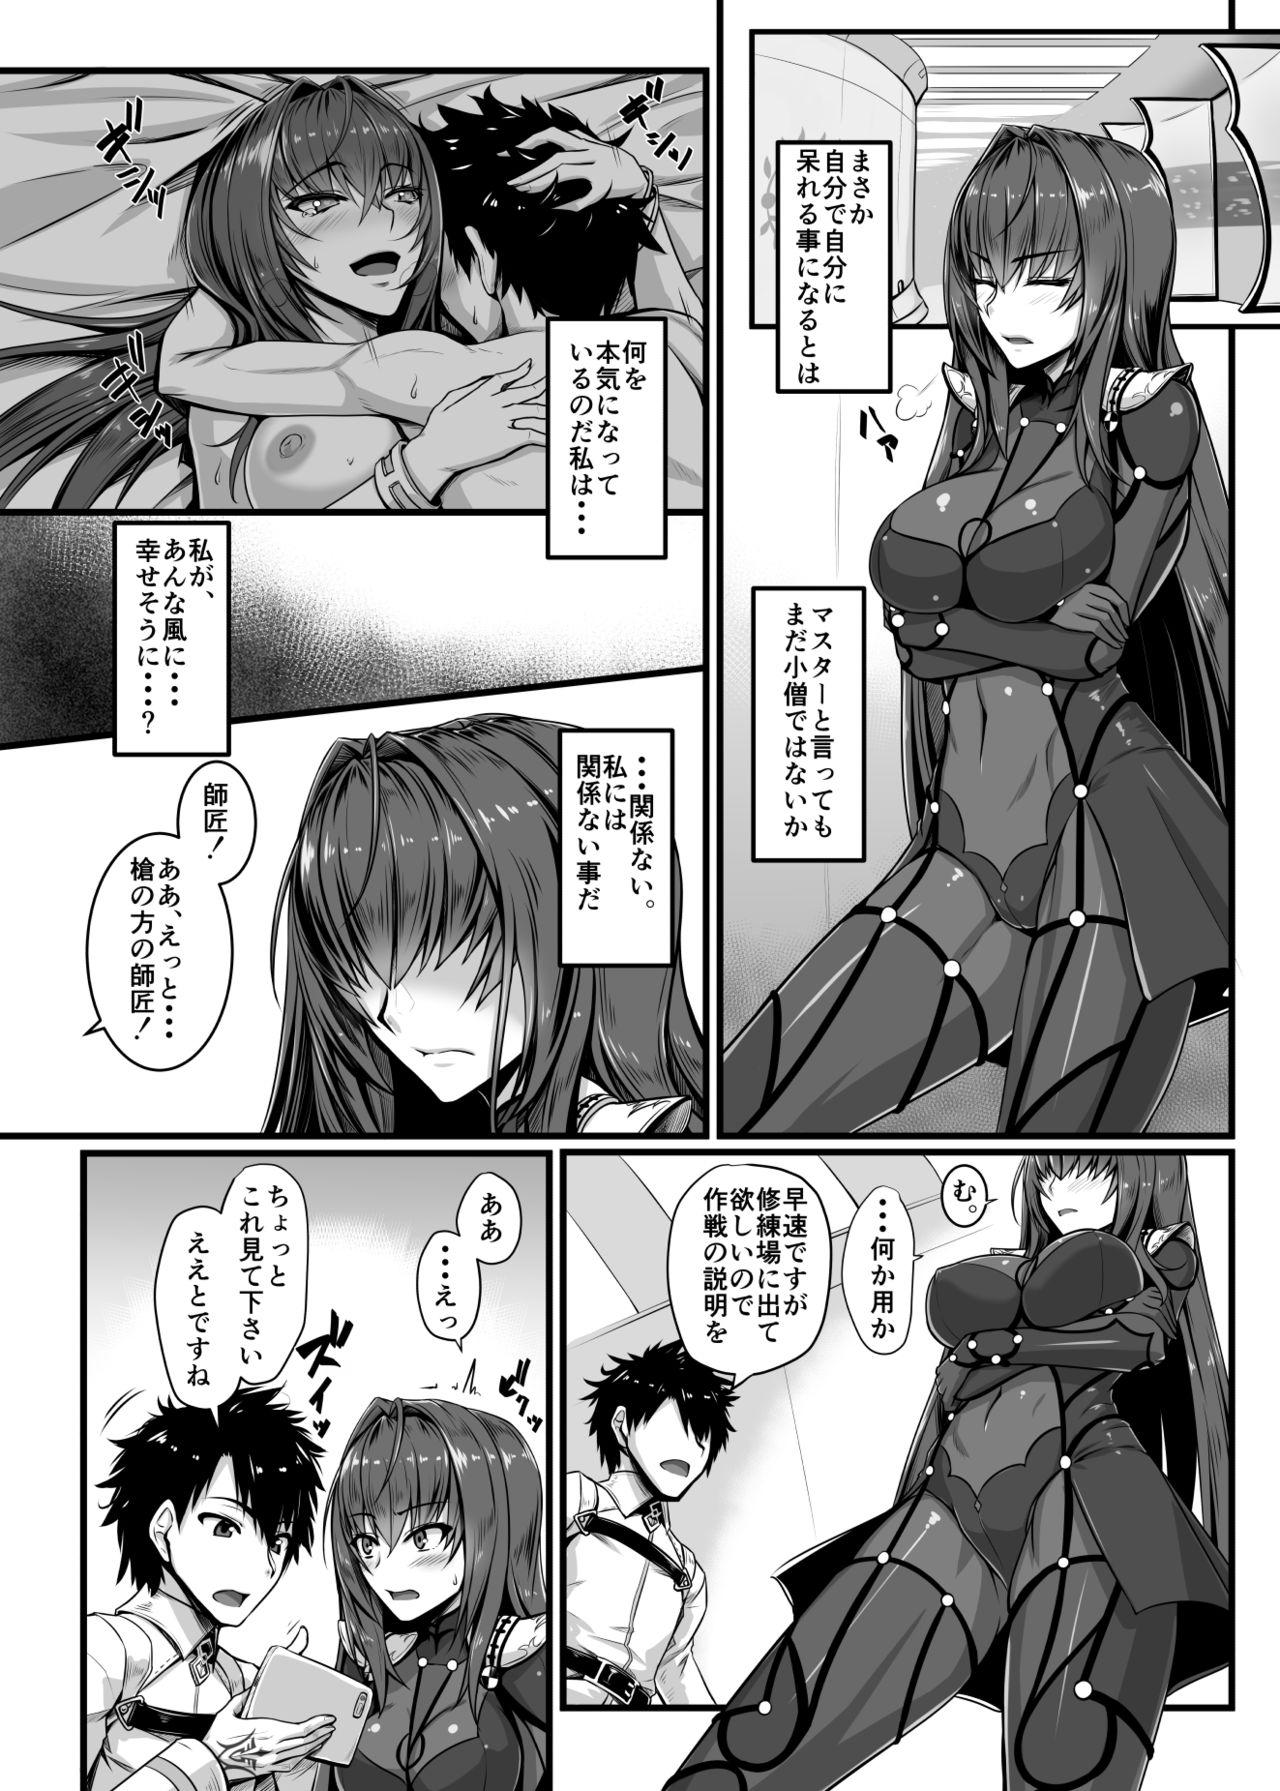 Selfie SSWX - Fate grand order Old Young - Page 4